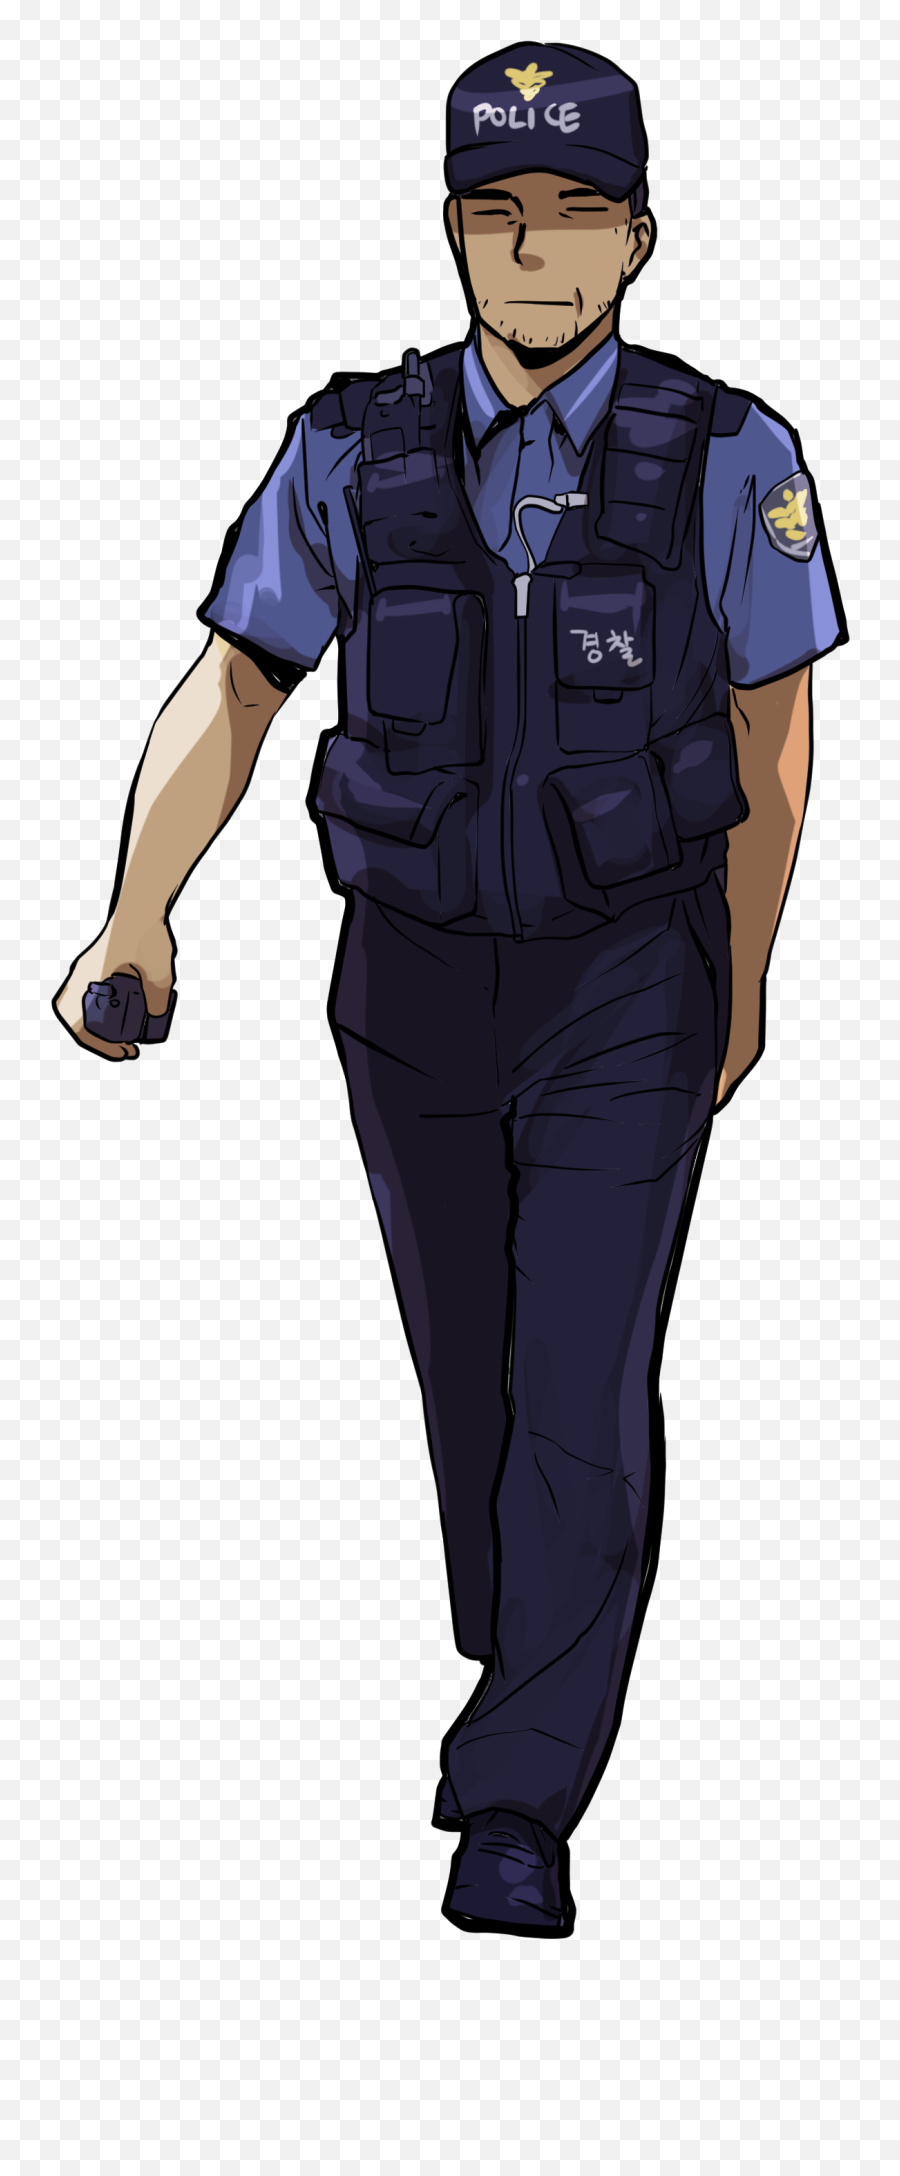 Police Officer Military Uniform - Male Police Officer Png,Police Png